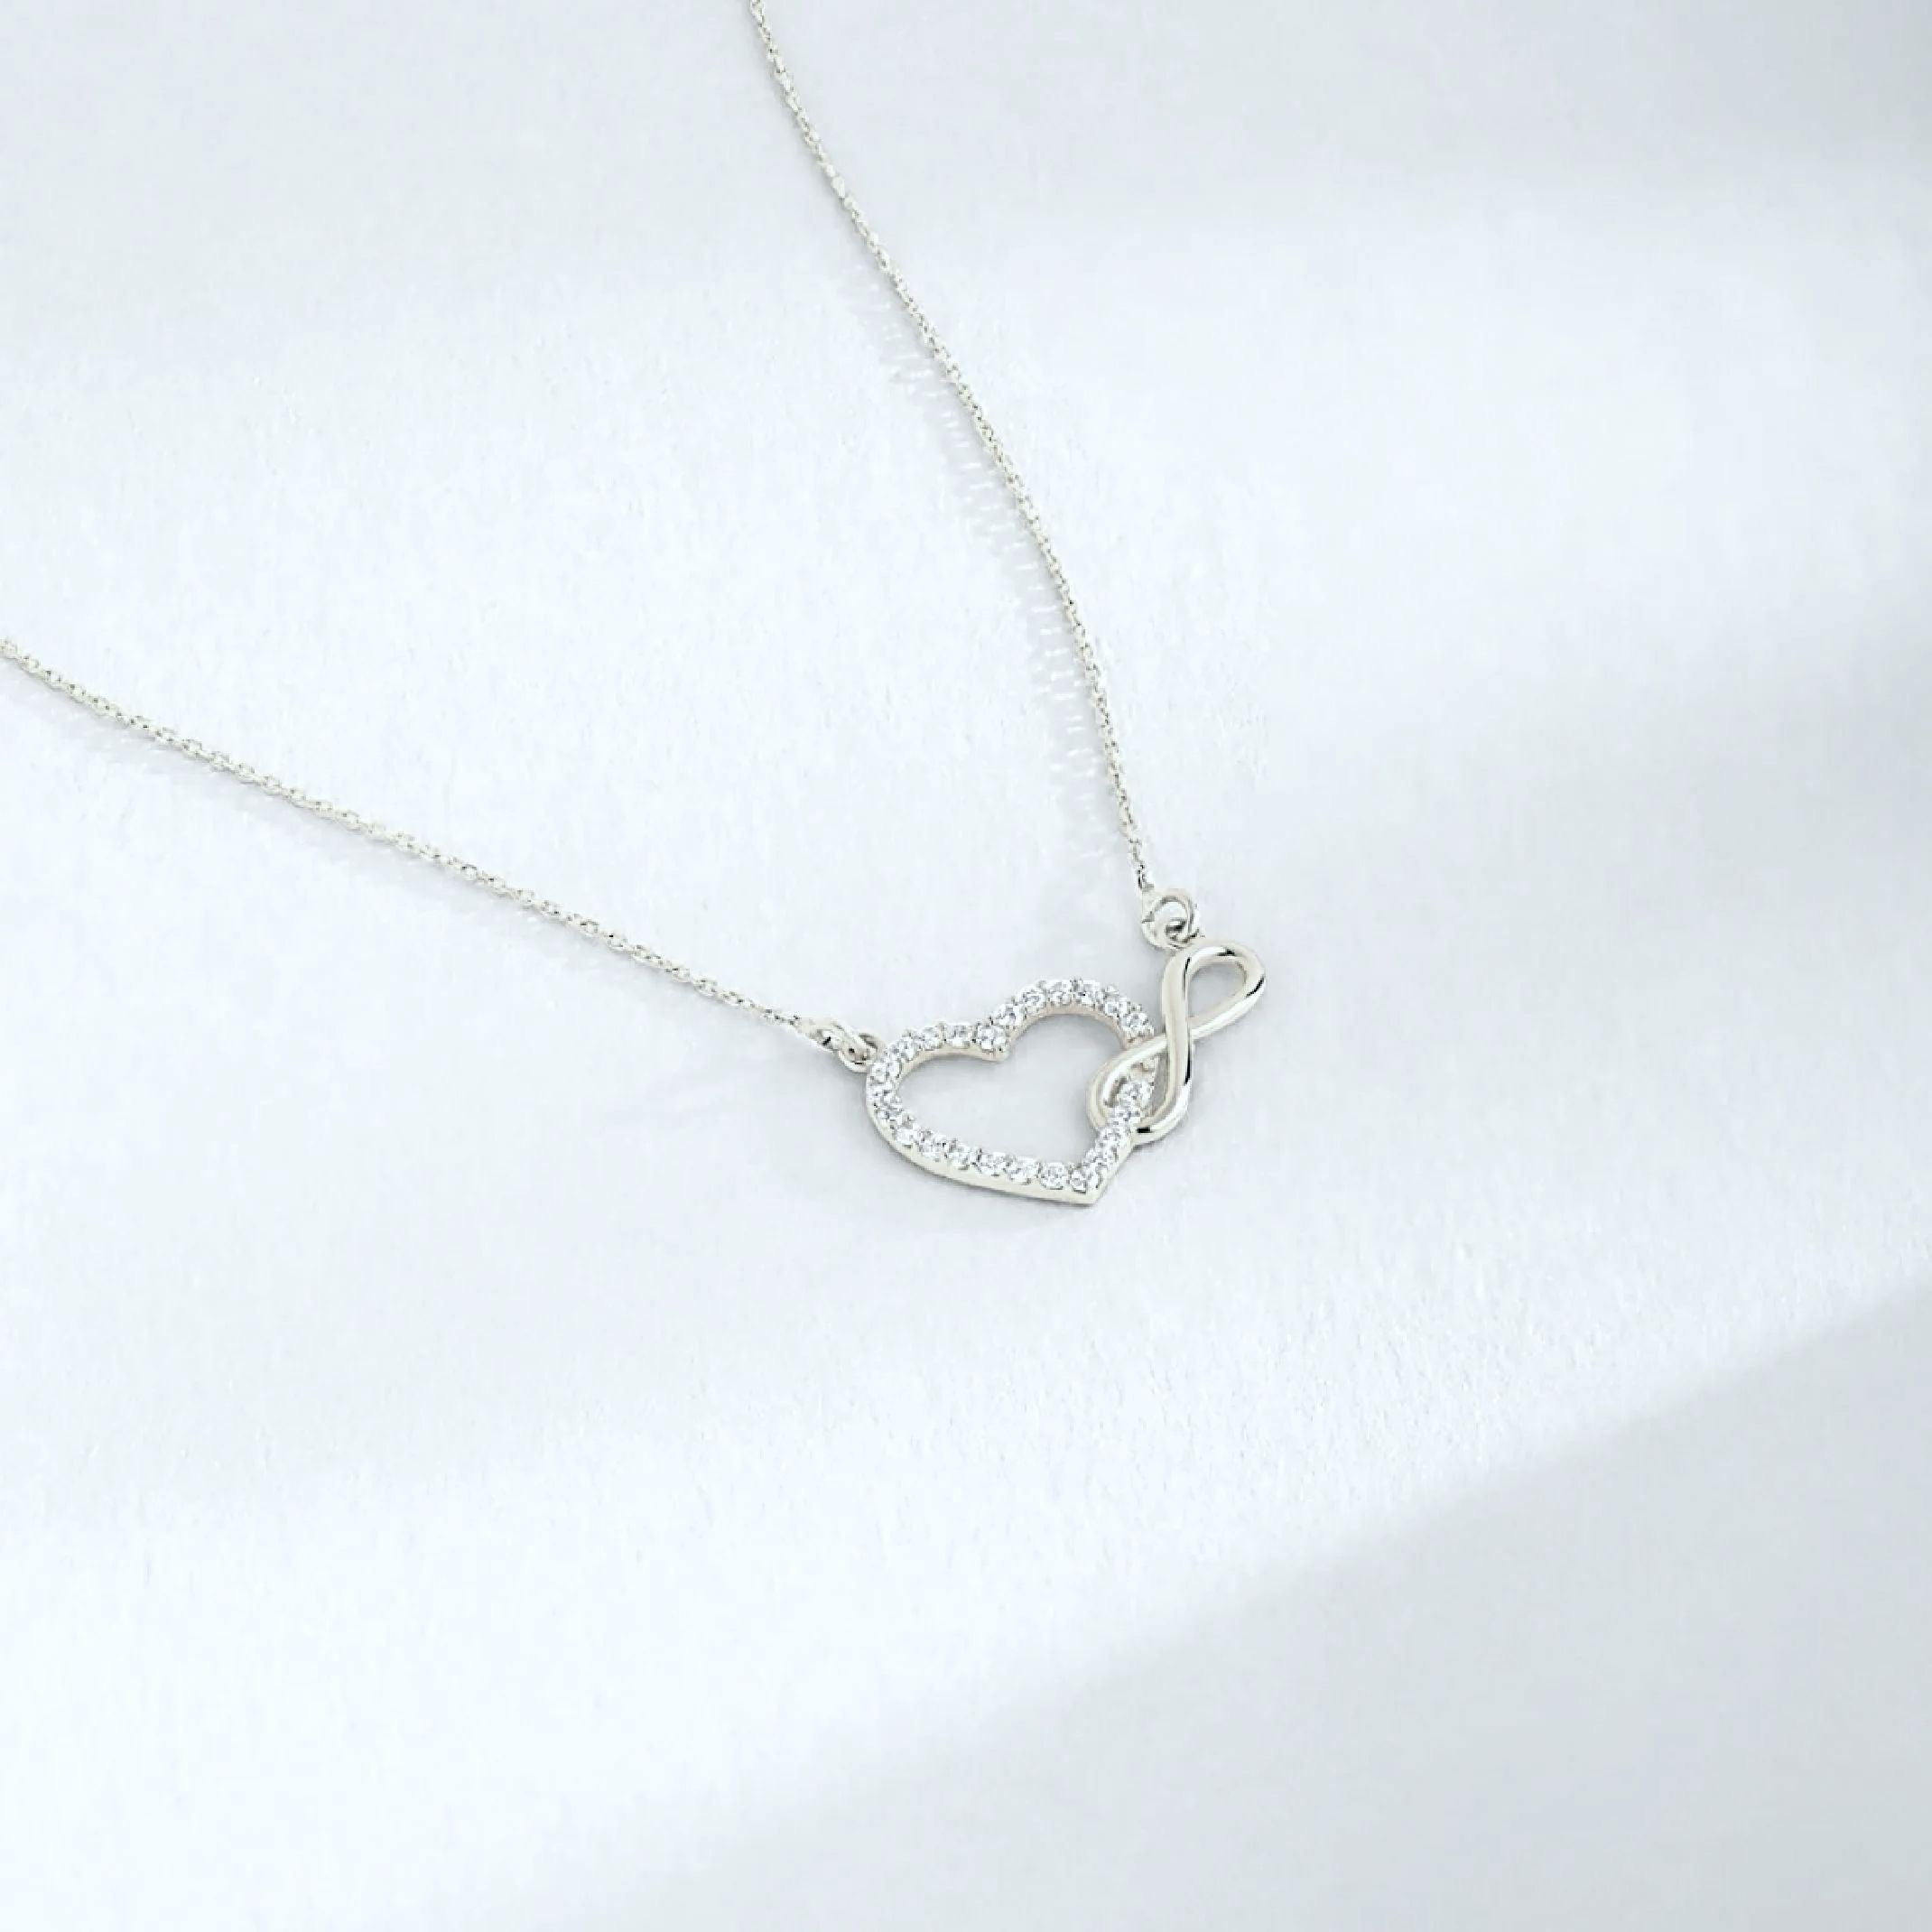 Silver infinity heart necklace 